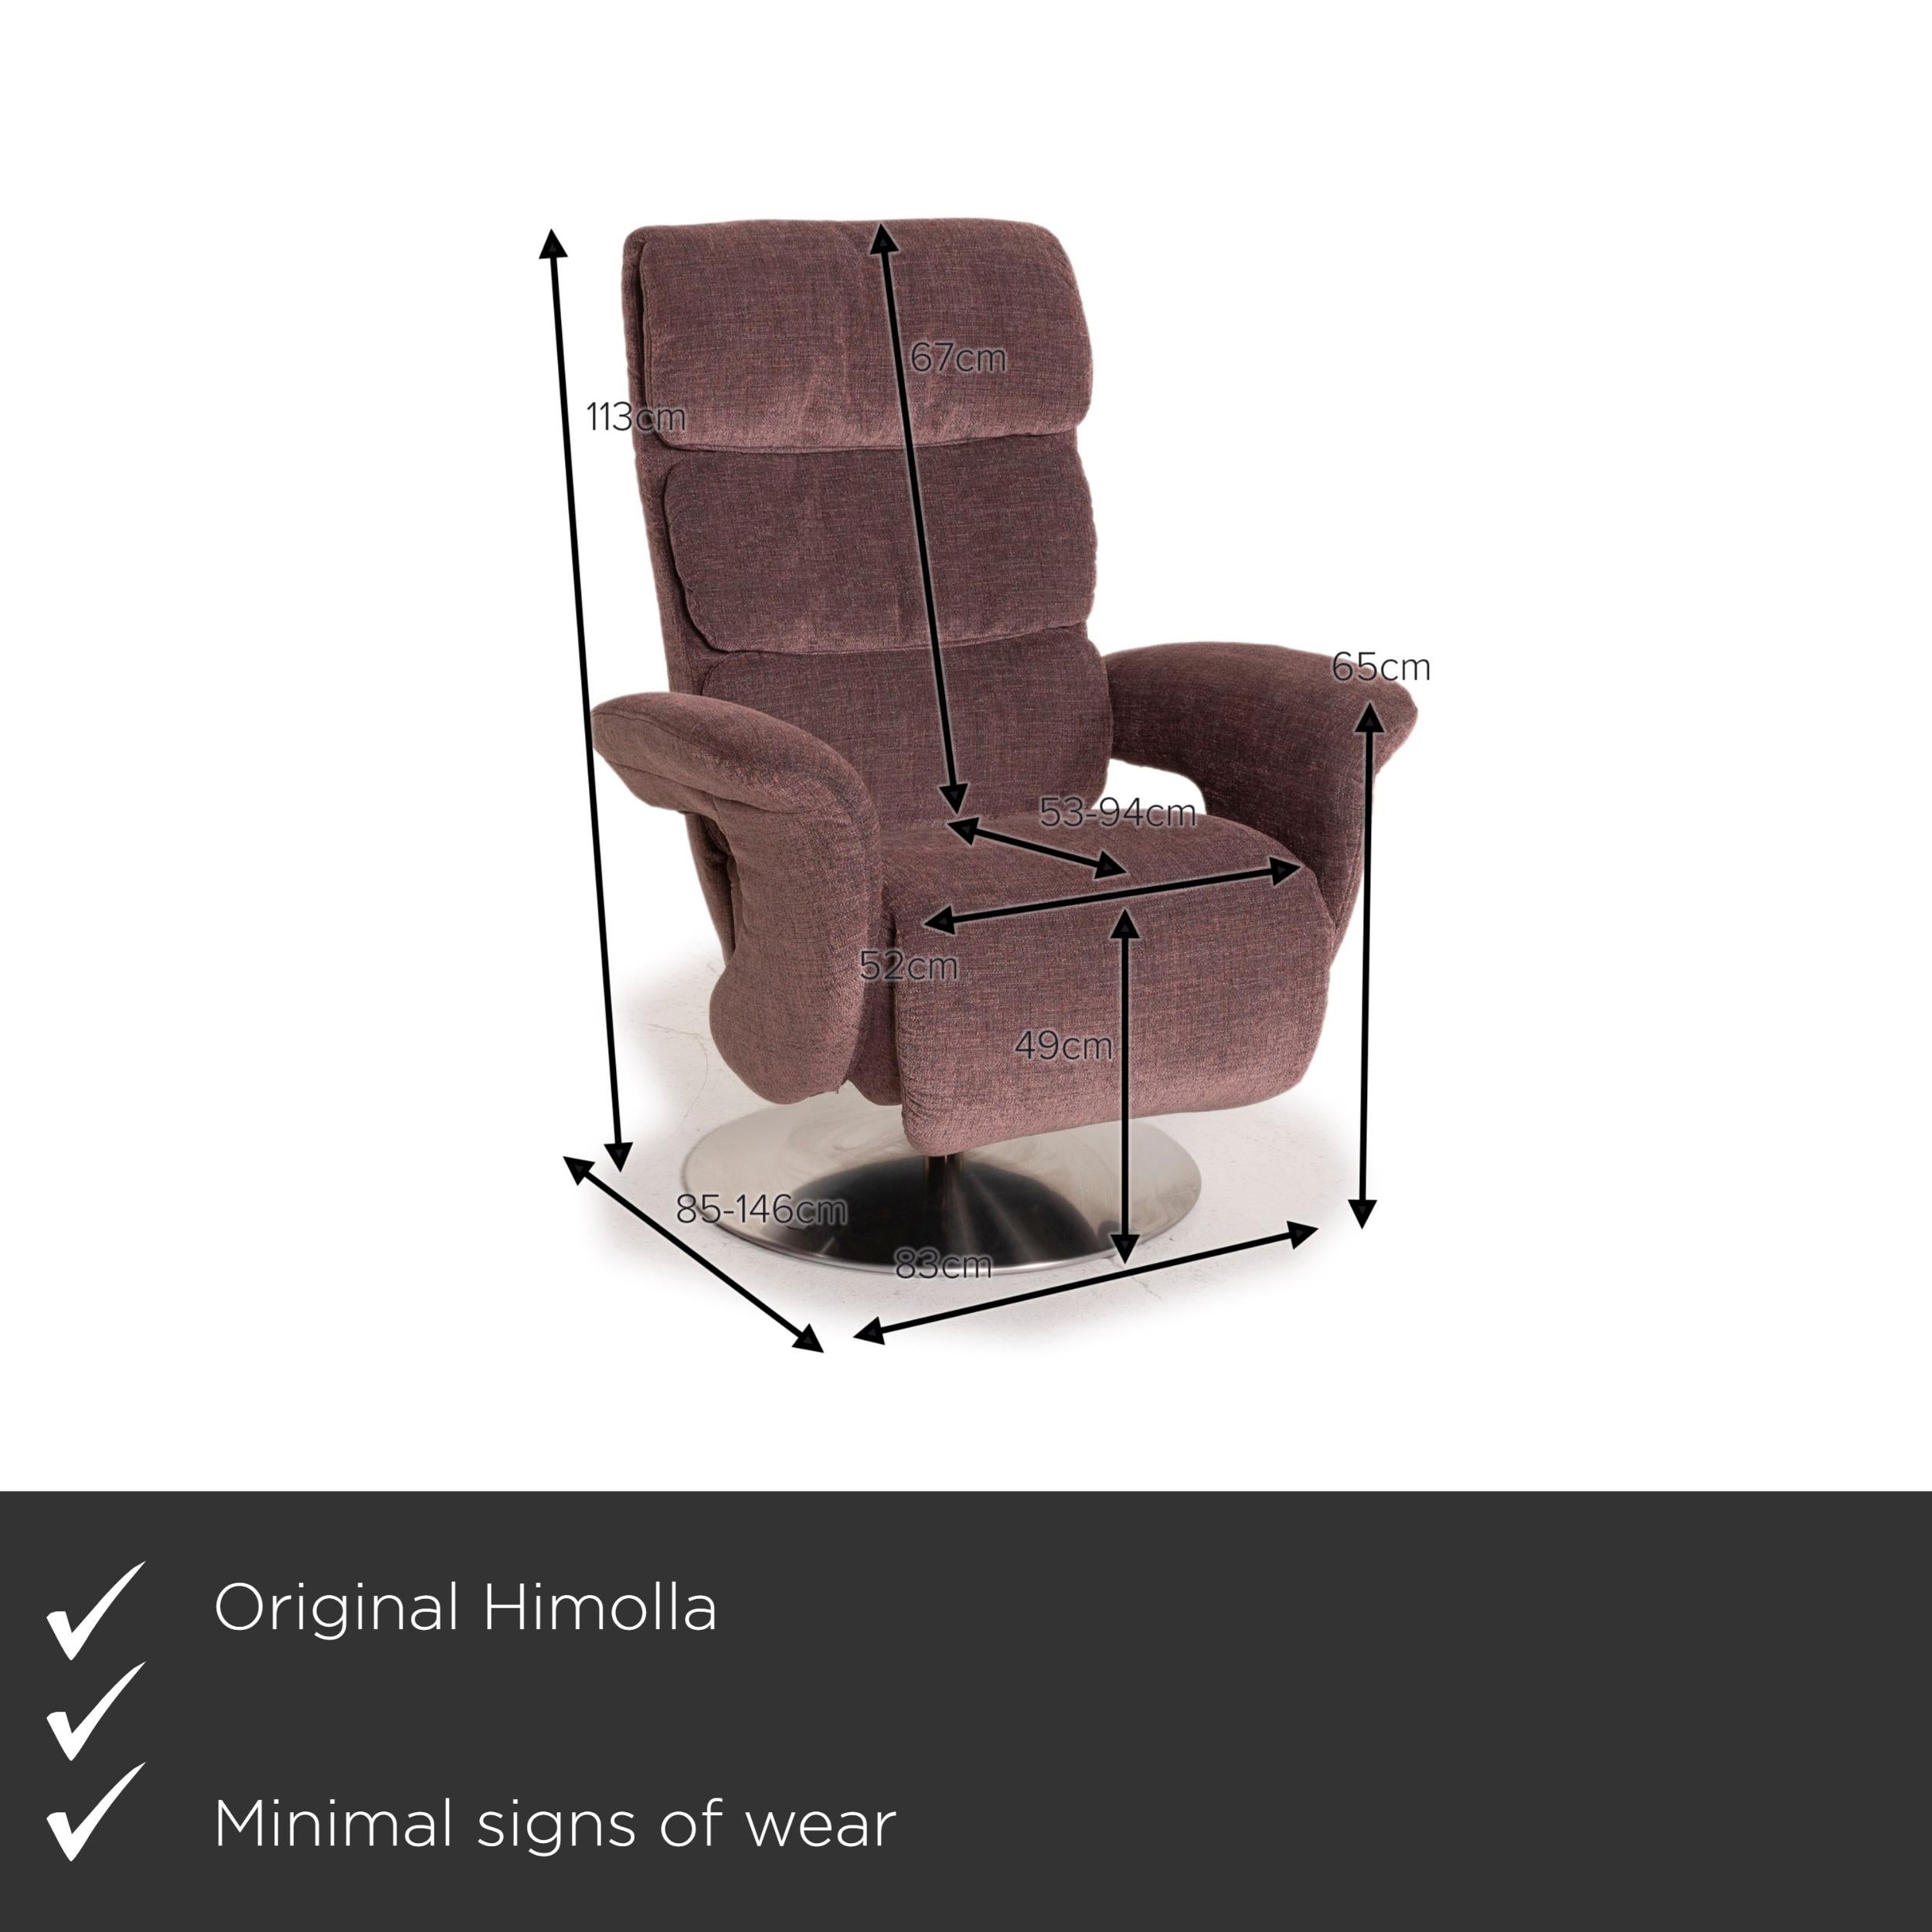 We present to you a Himolla Hurley fabric armchair rose relax function.

 

 Product measurements in centimeters:
 

Depth 85
Width 83
Height 113
Seat height 49
Rest height 65
Seat depth 53
Seat width 52
Back height 67.